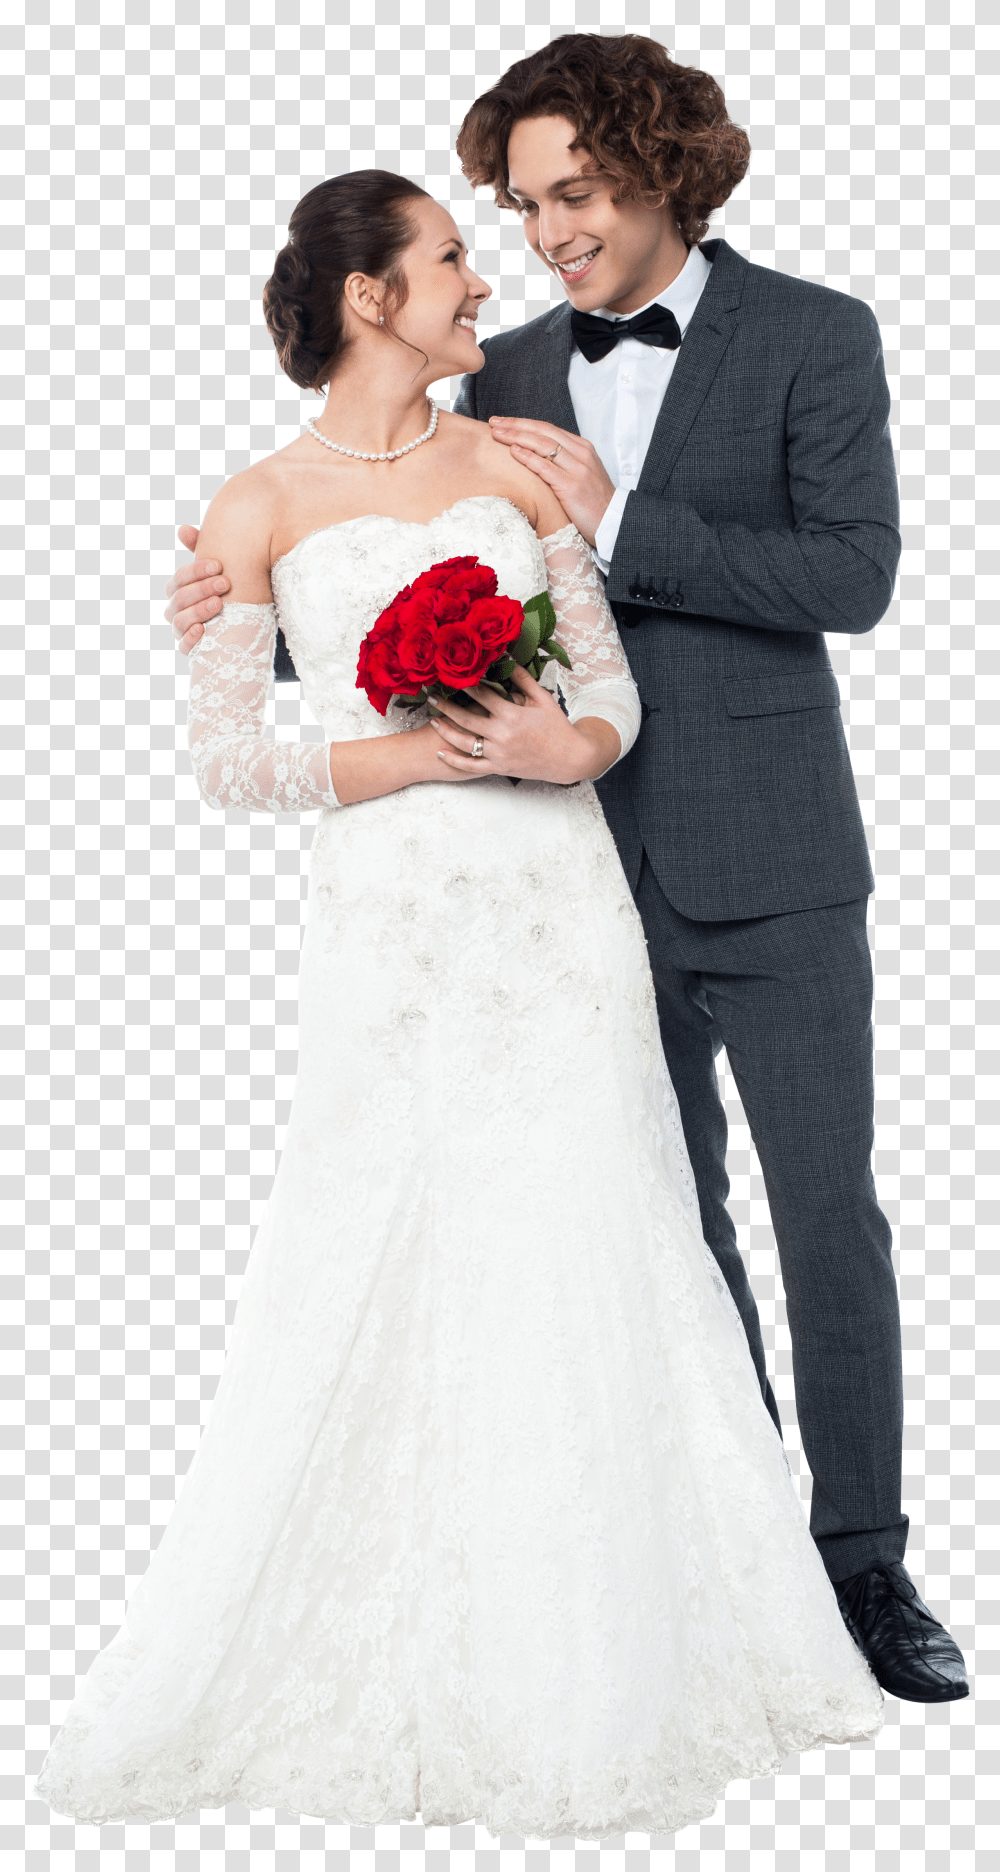 Download Wedding Couple Image For Free Marriage Couple Transparent Png